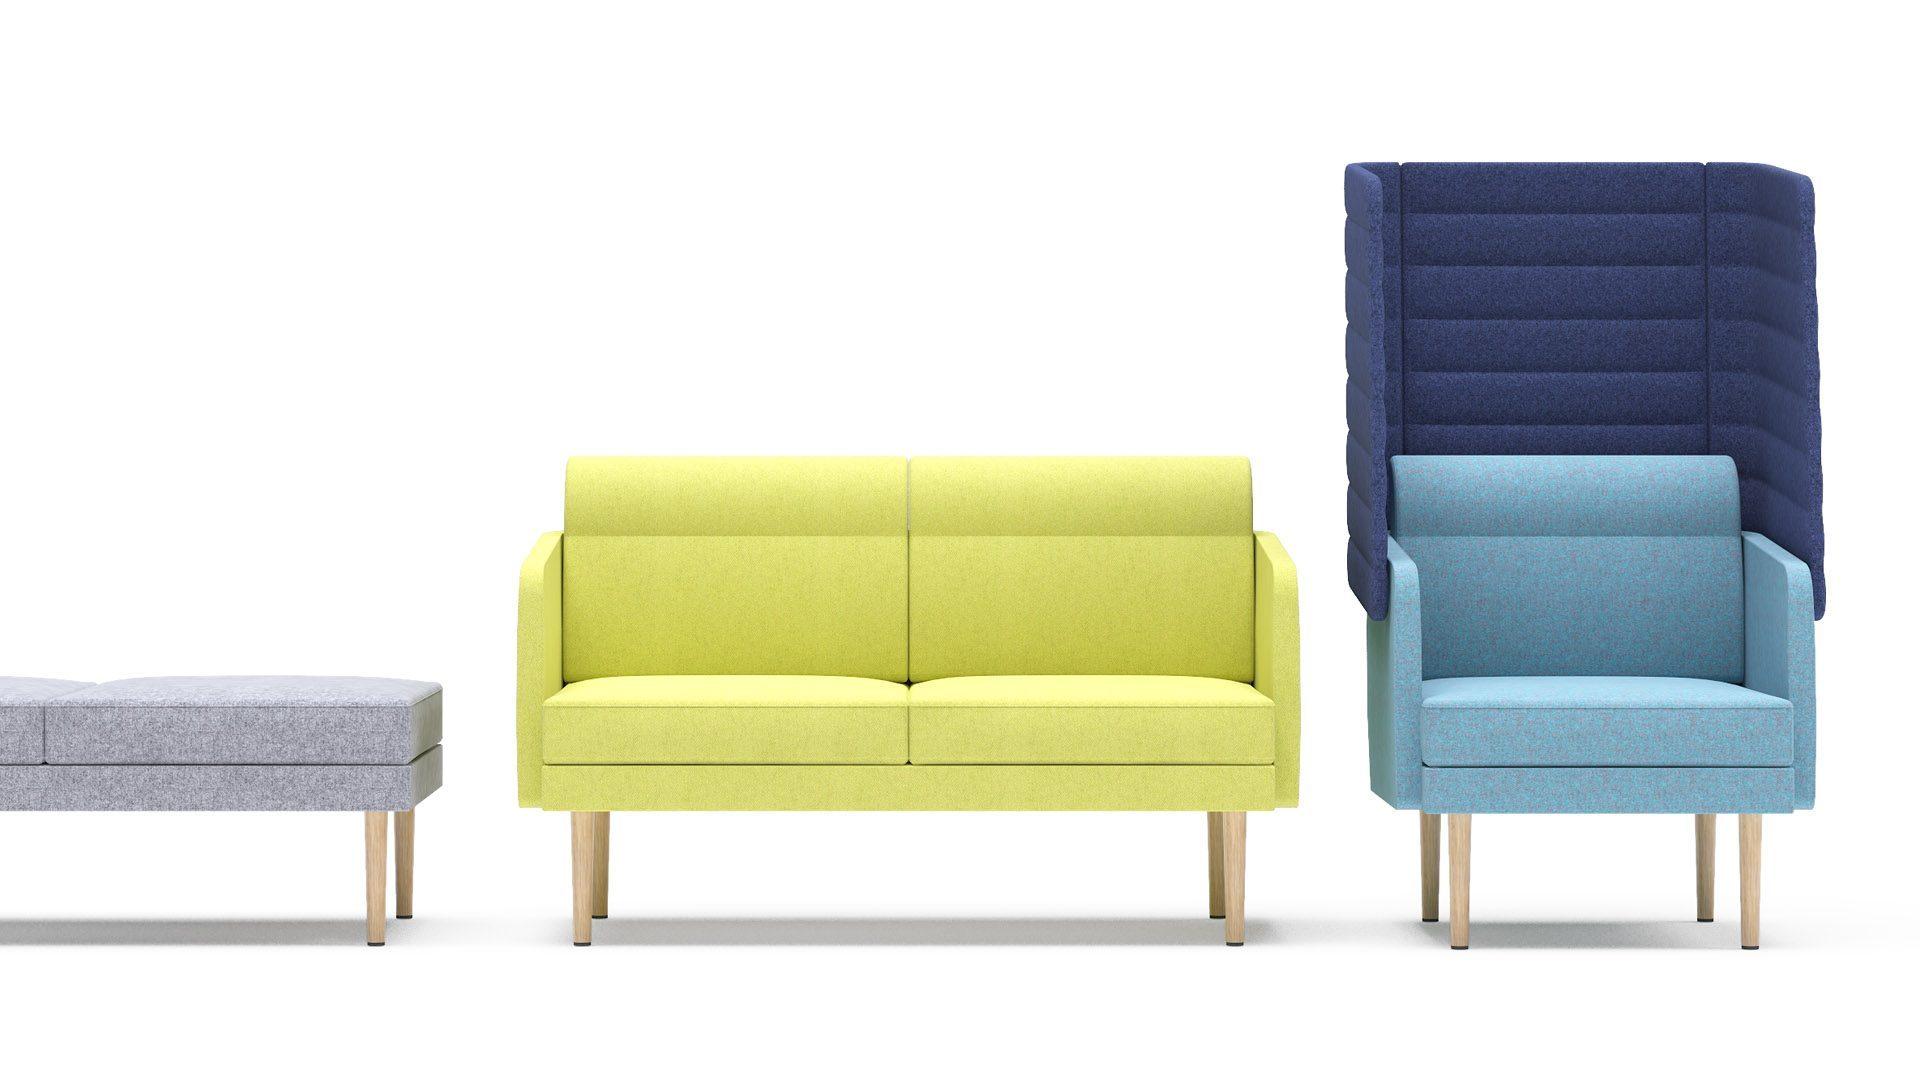 Arcipelago offers 3 different height options for flexible informal spaces